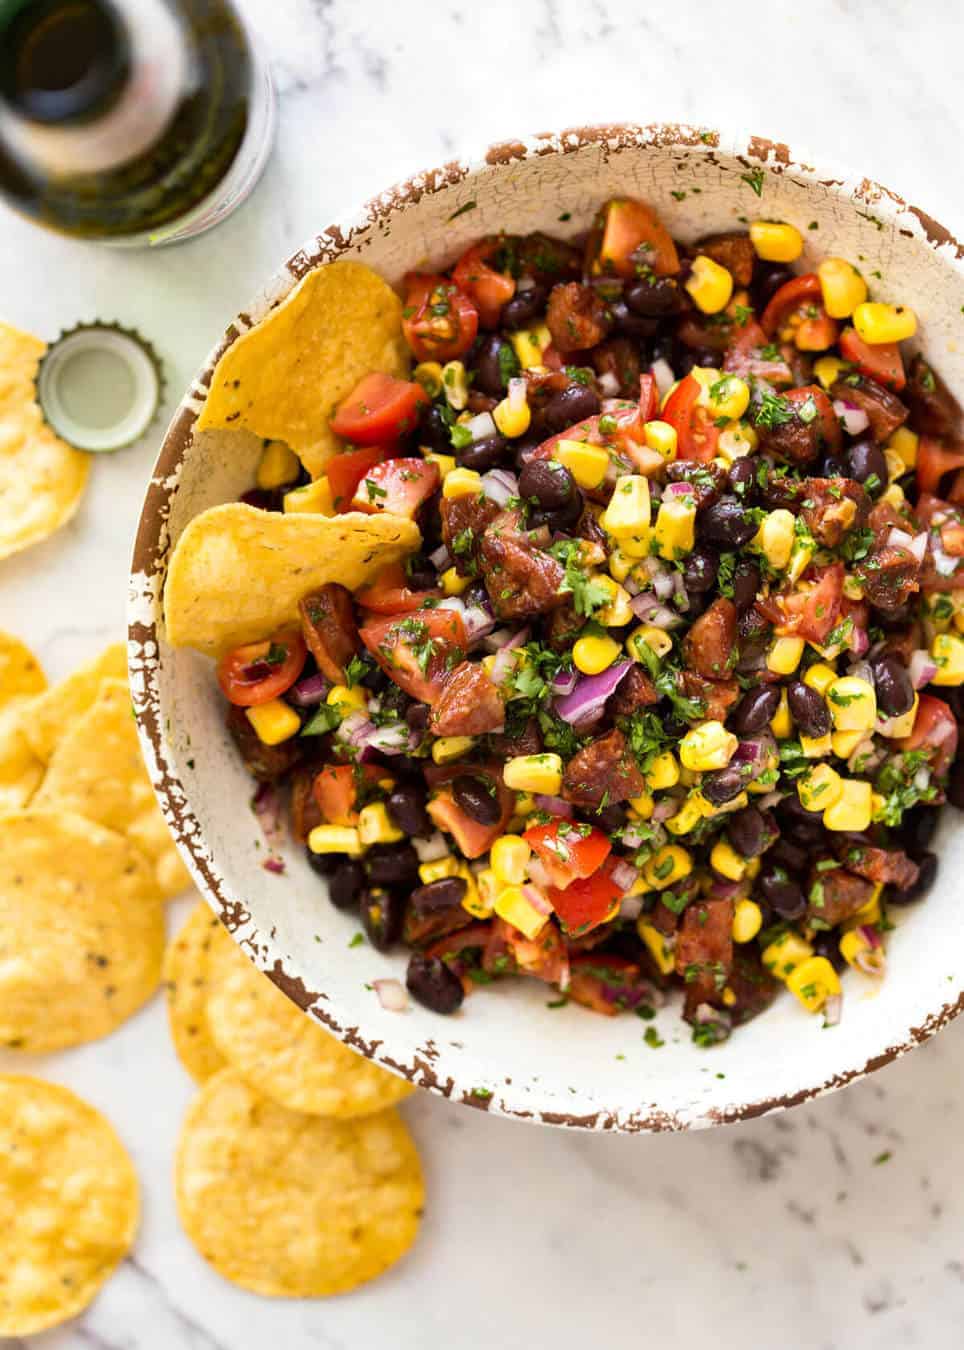 I call this a PIG OUT Salsa. Sensible people would call it an Chorizo, Black Bean and Corn Salsa. :) www.recipetineats.com